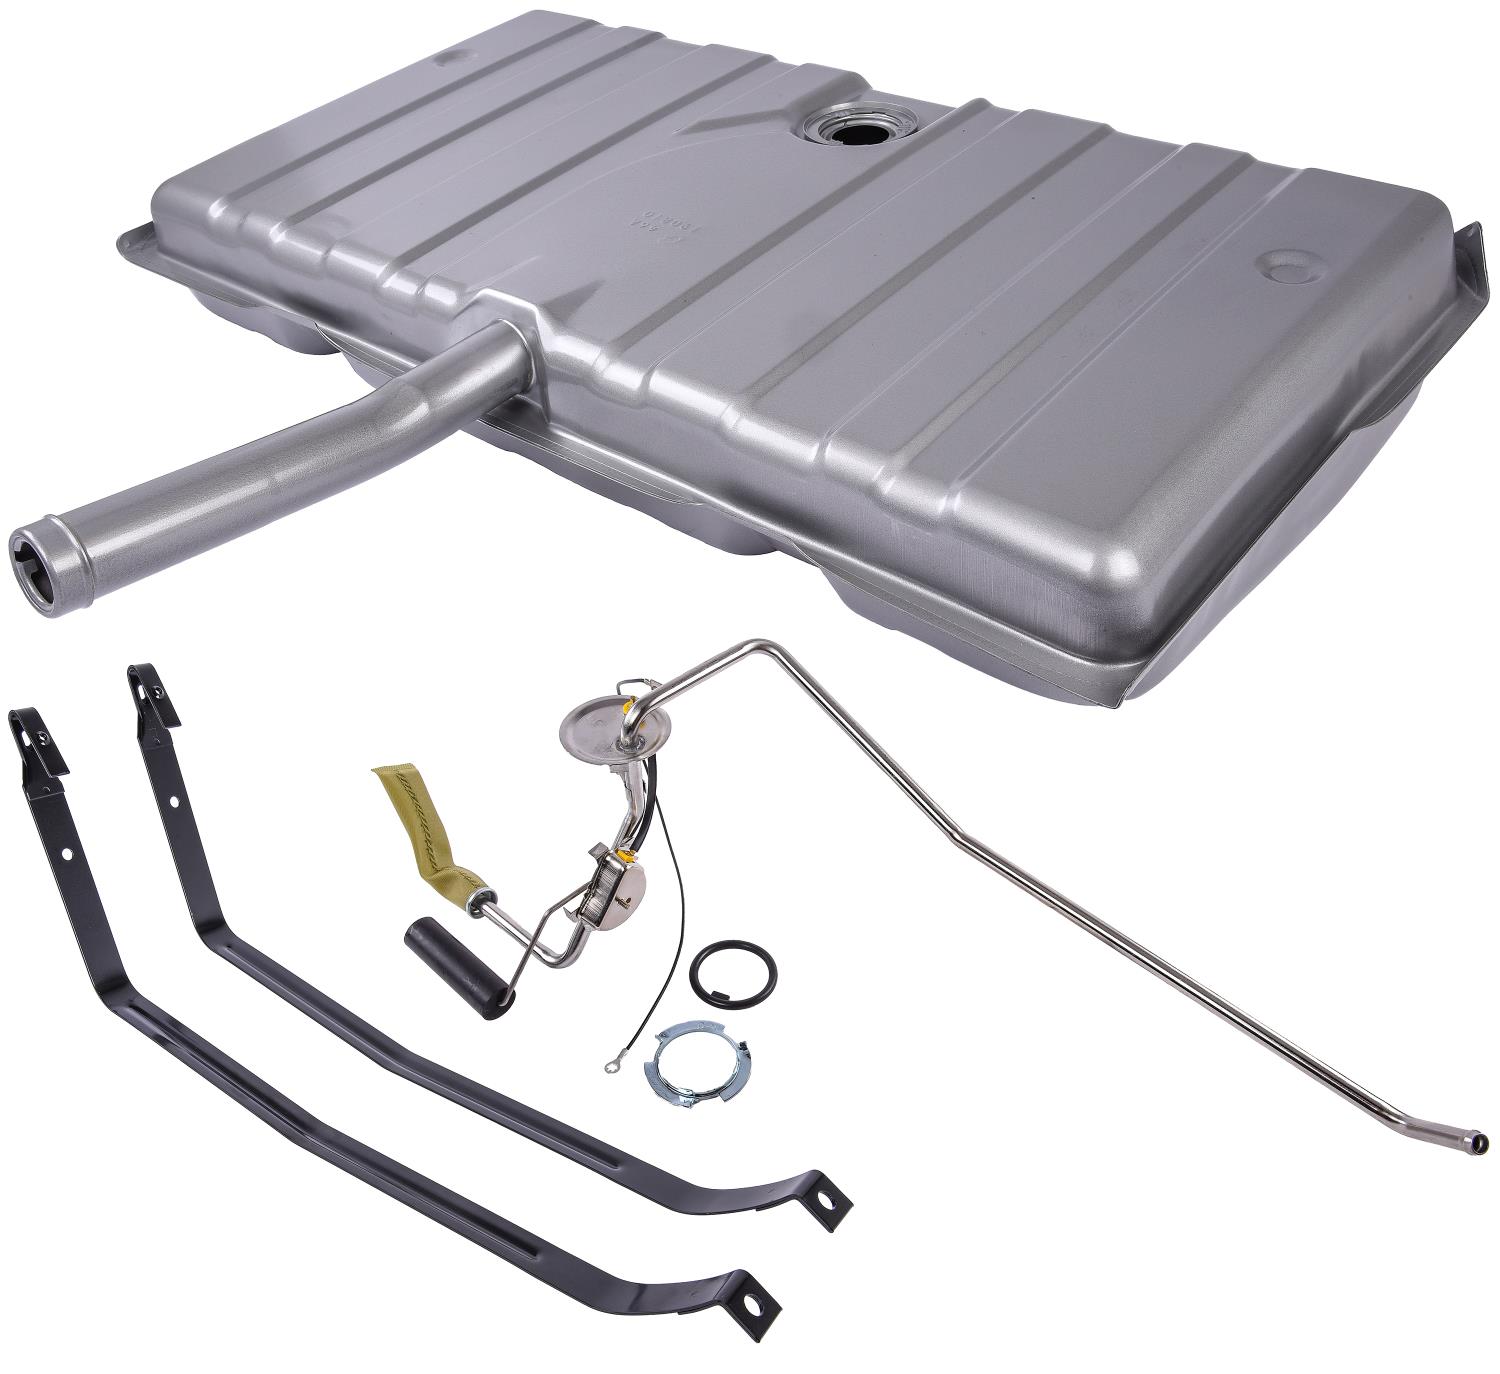 Fuel Tank Kit with Straps & Sending Unit for 1968 Chevrolet Chevy II and 1969 Chevrolet Nova [16-Gallon]